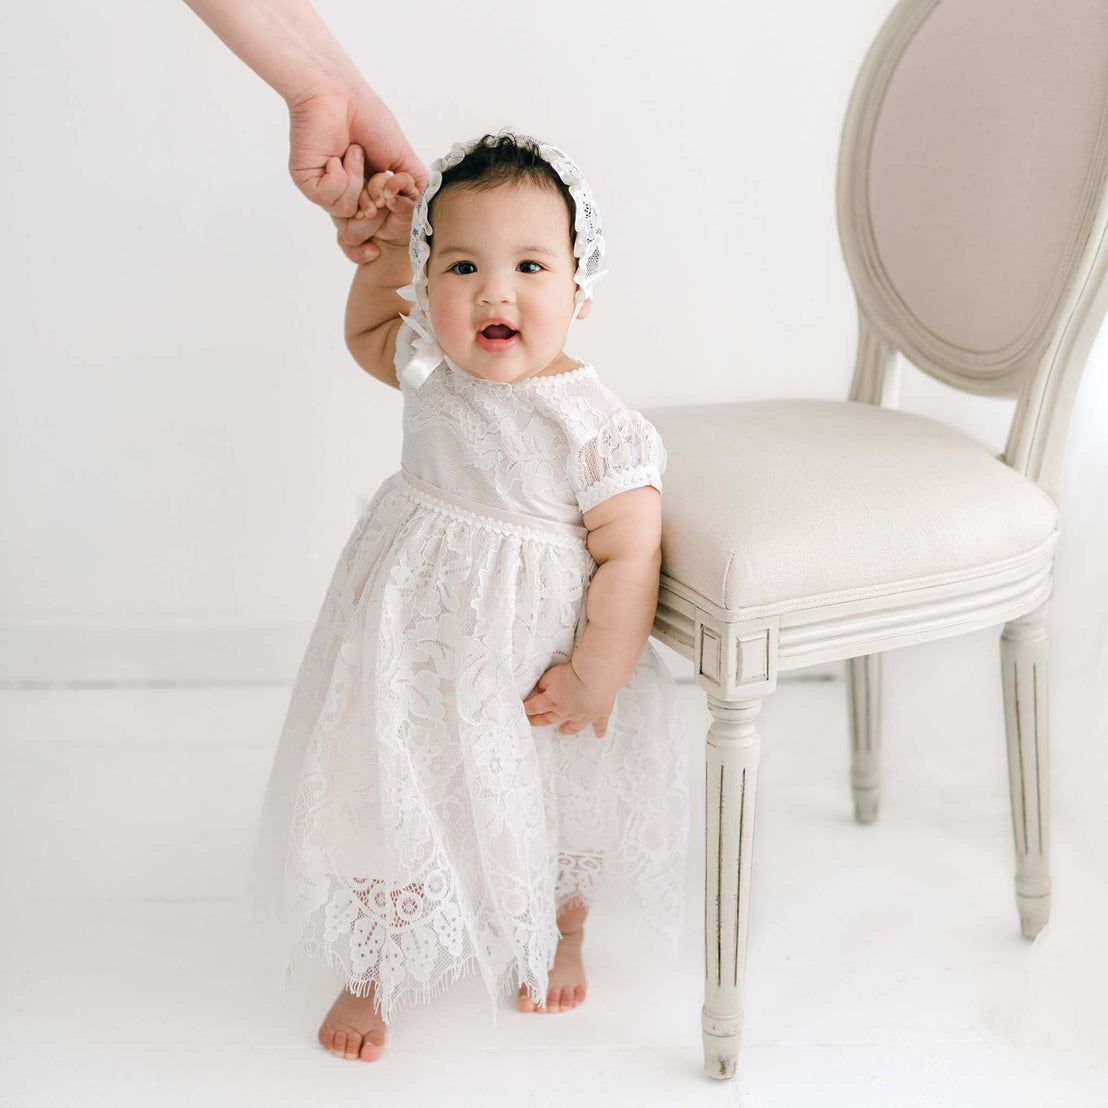 A baby girl in a Victoria Puff Sleeve Christening Dress standing beside a chair, holding an adult's hand. She wears a white headband and looks forward with a joyful expression.